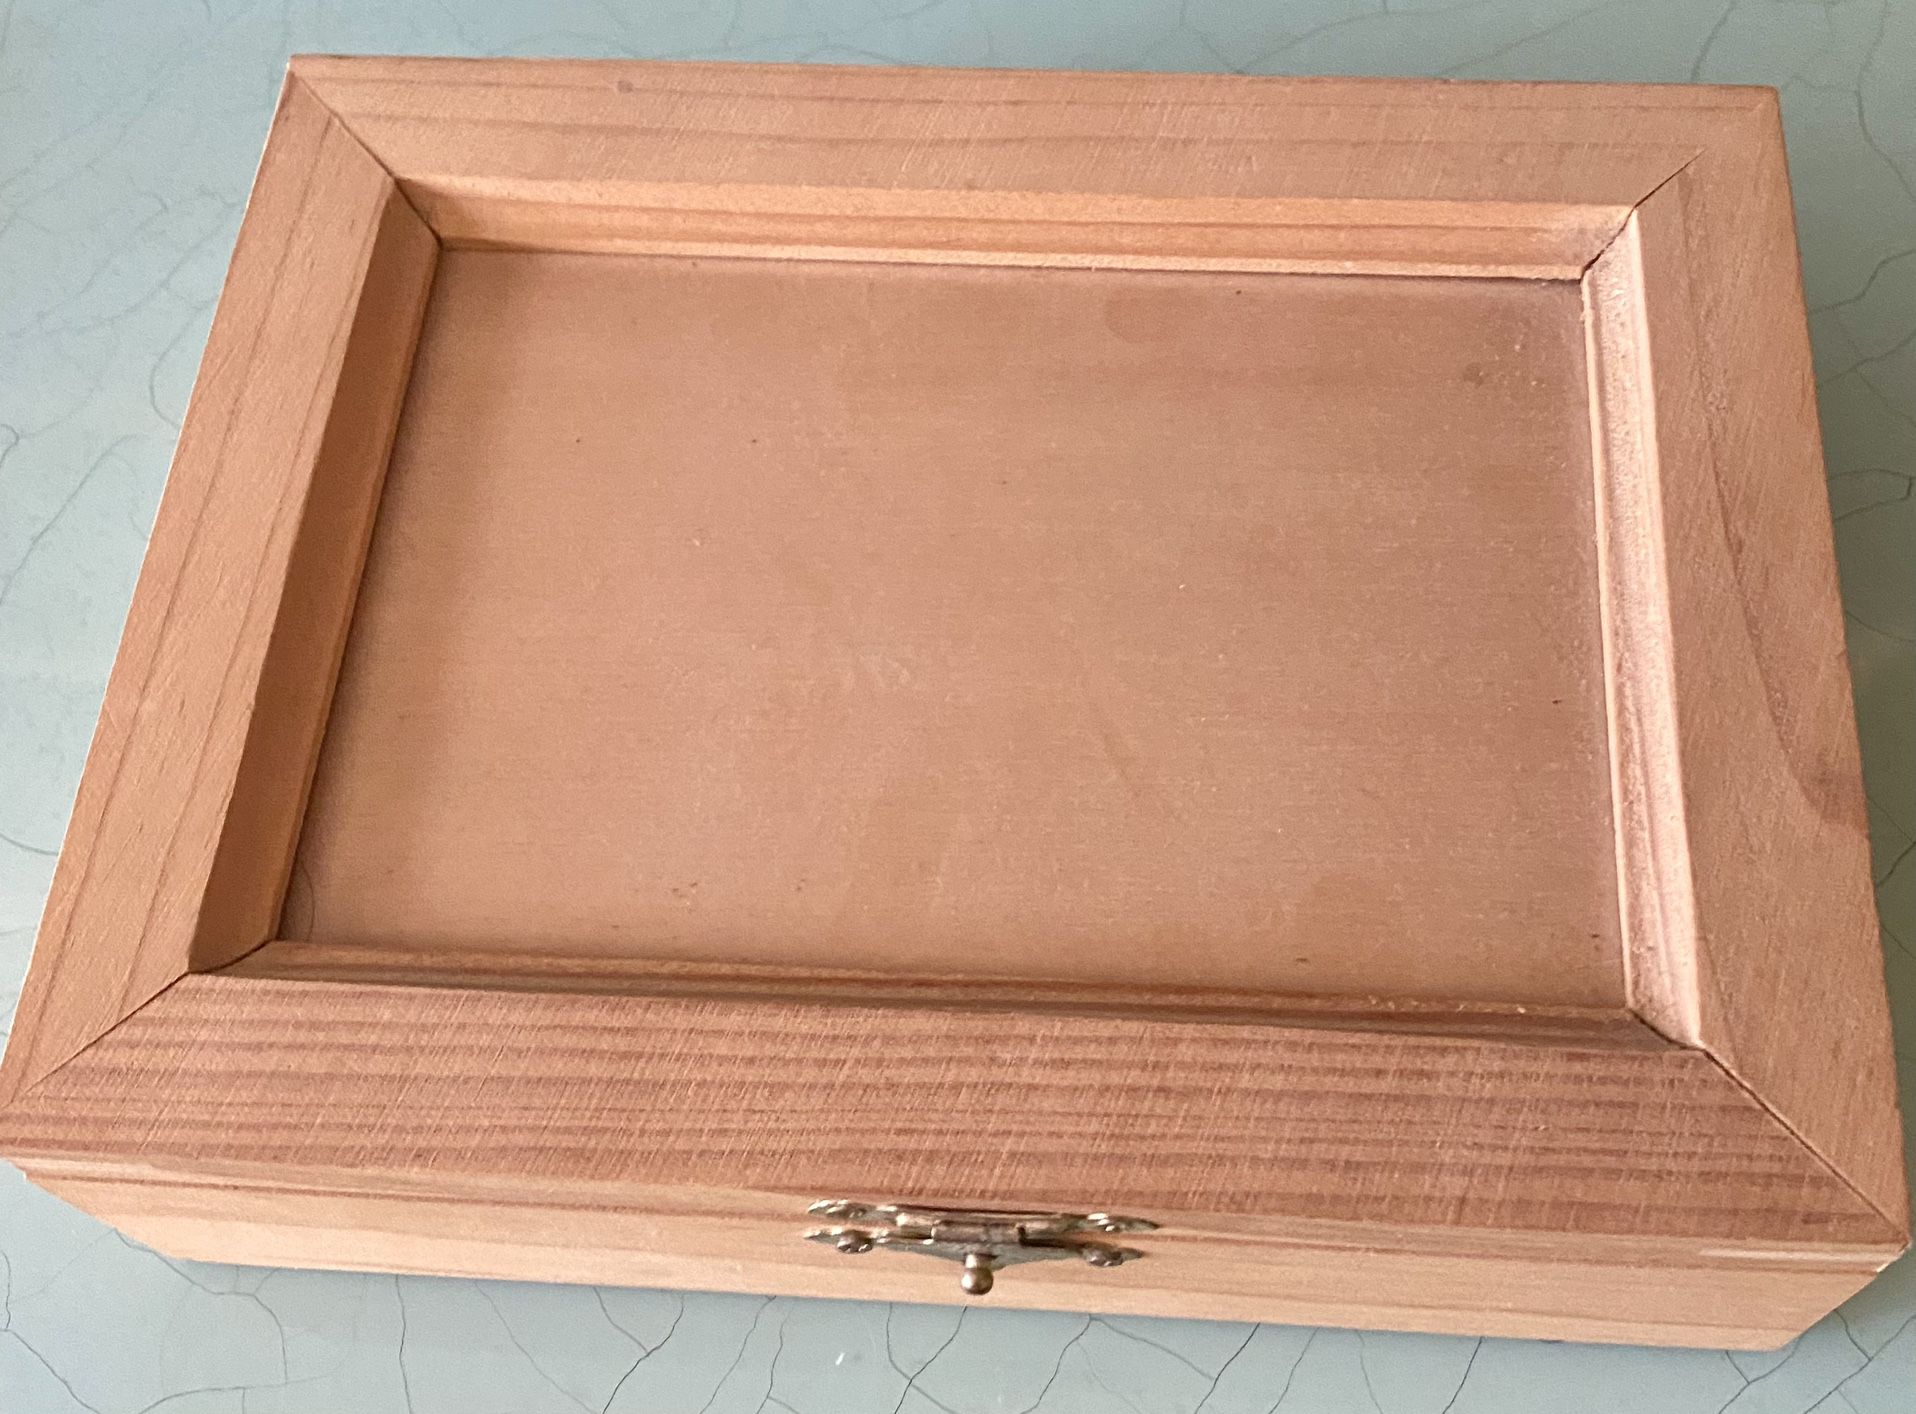 Small Wooden Box That Opens For Pictures Or Valuable Items 